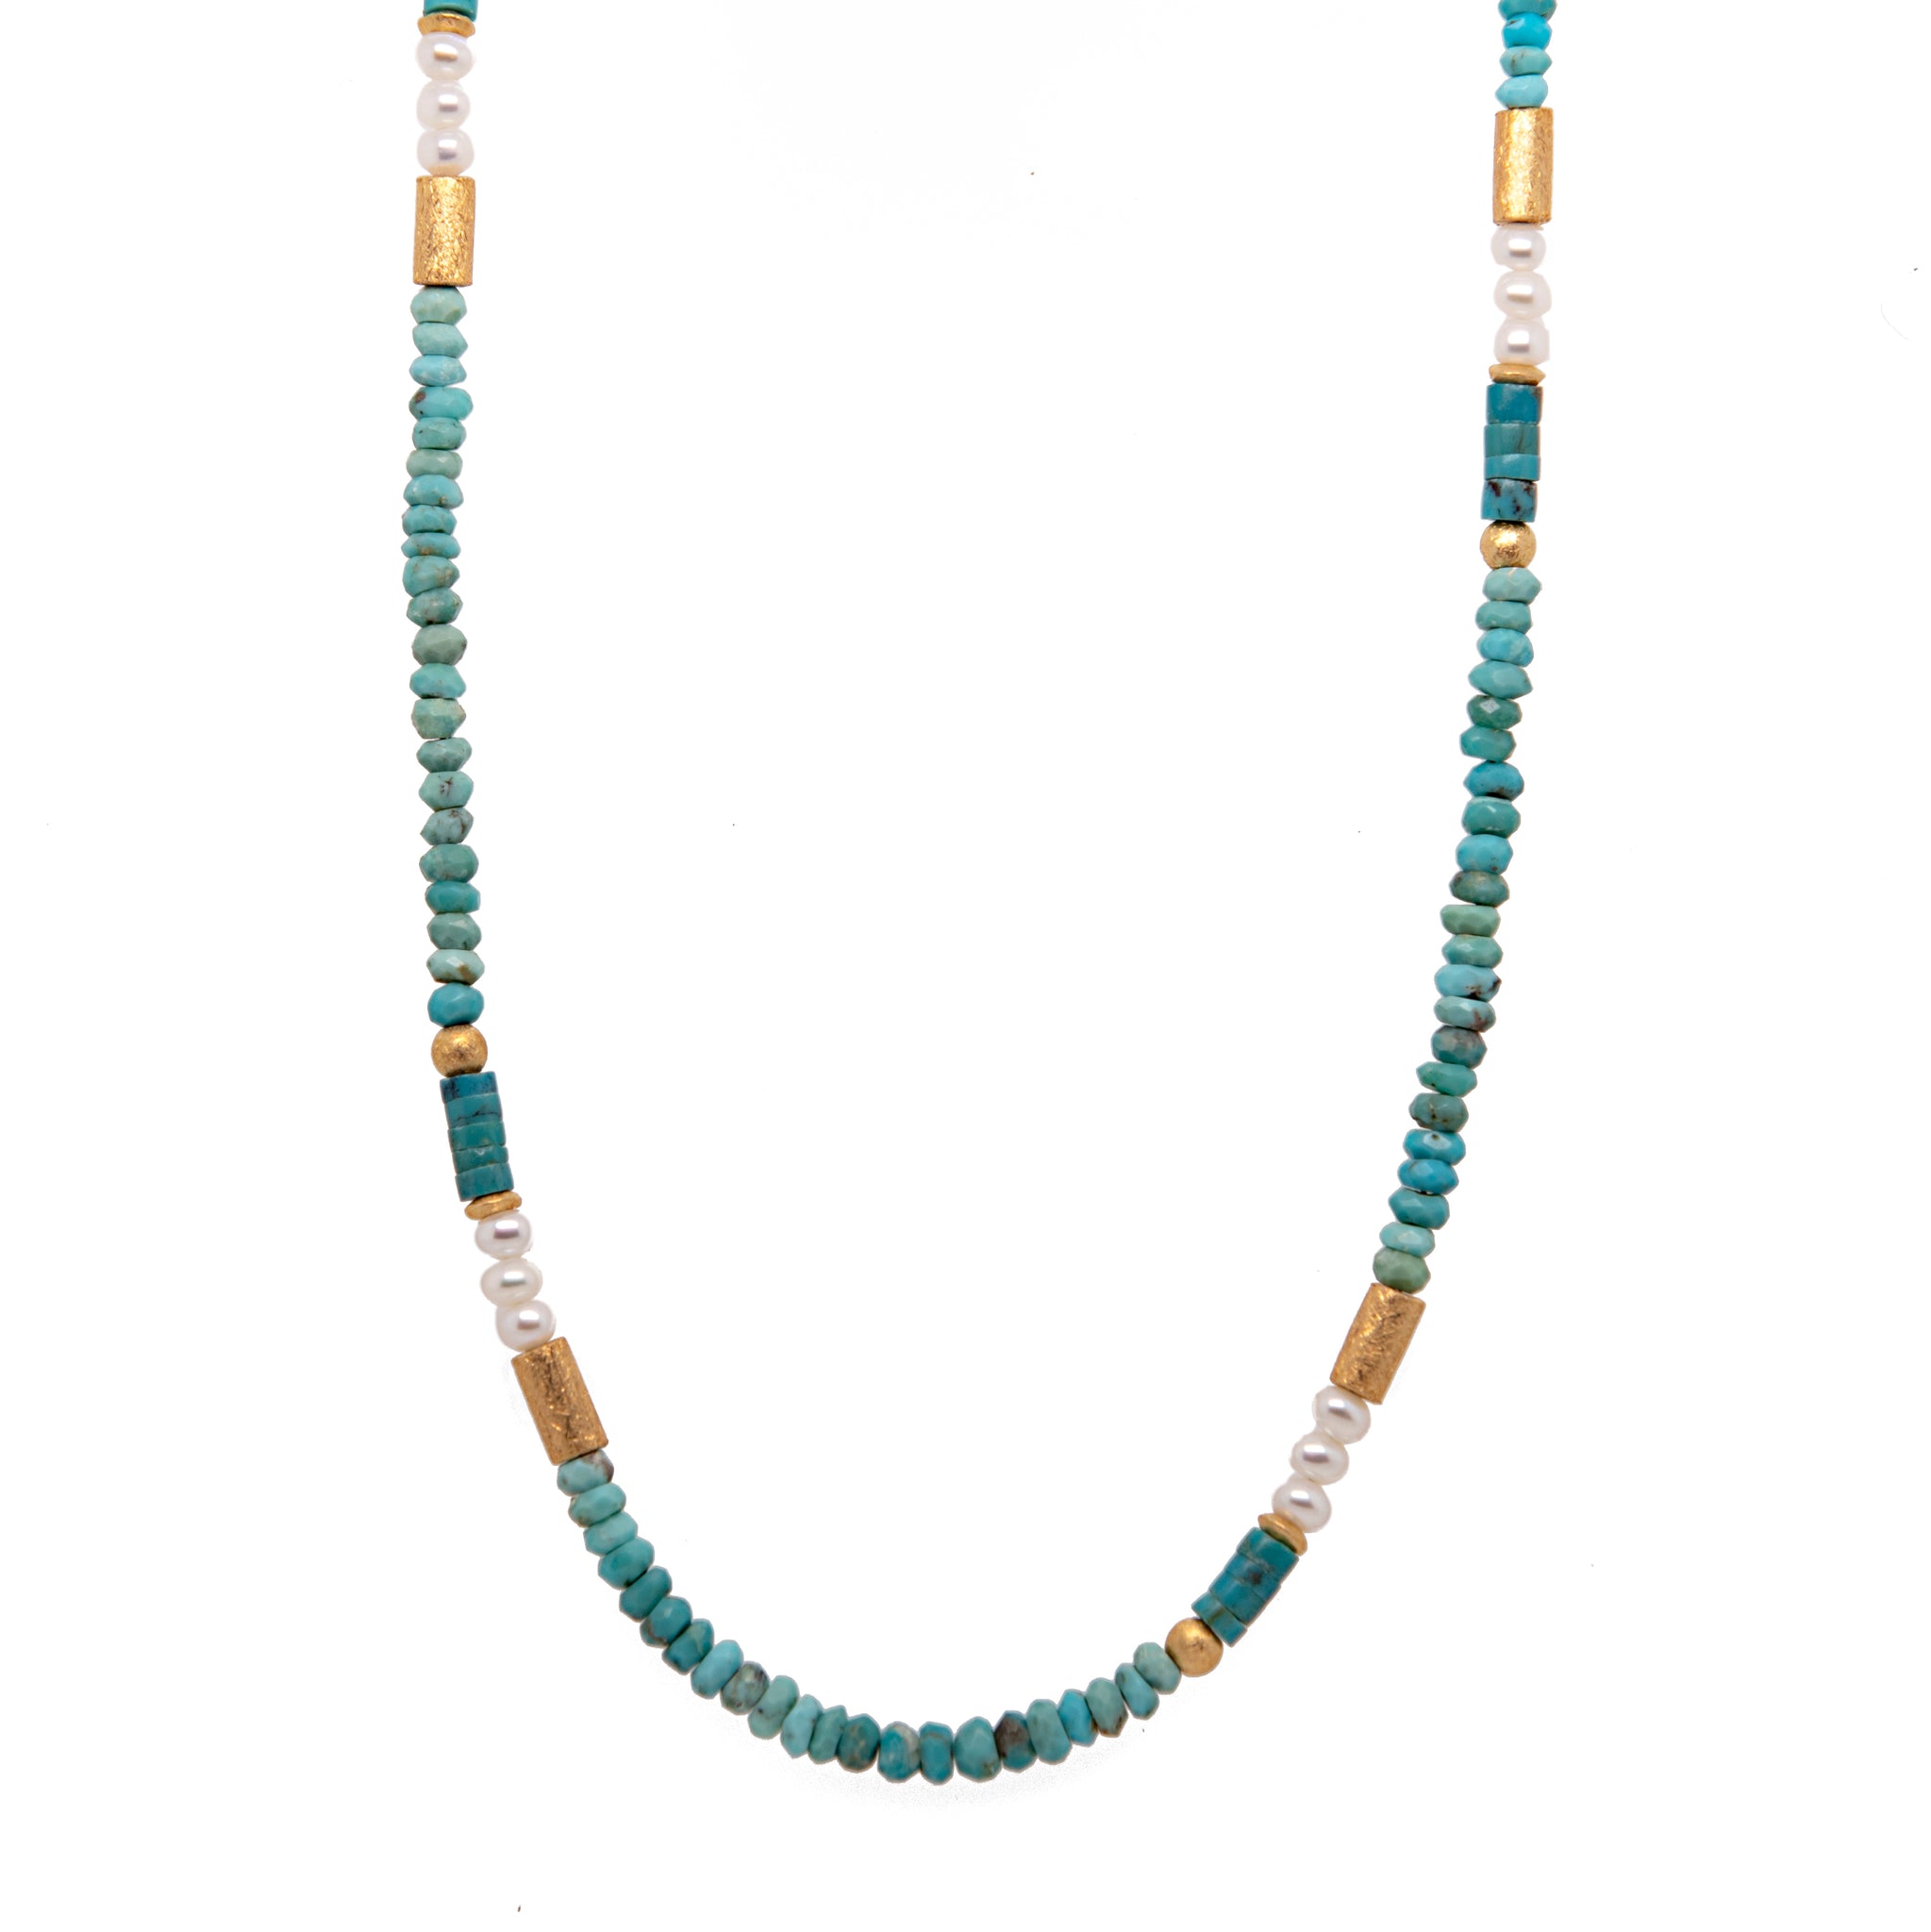 NECKLACE- TURQUOISE AND WHITE PEARLS